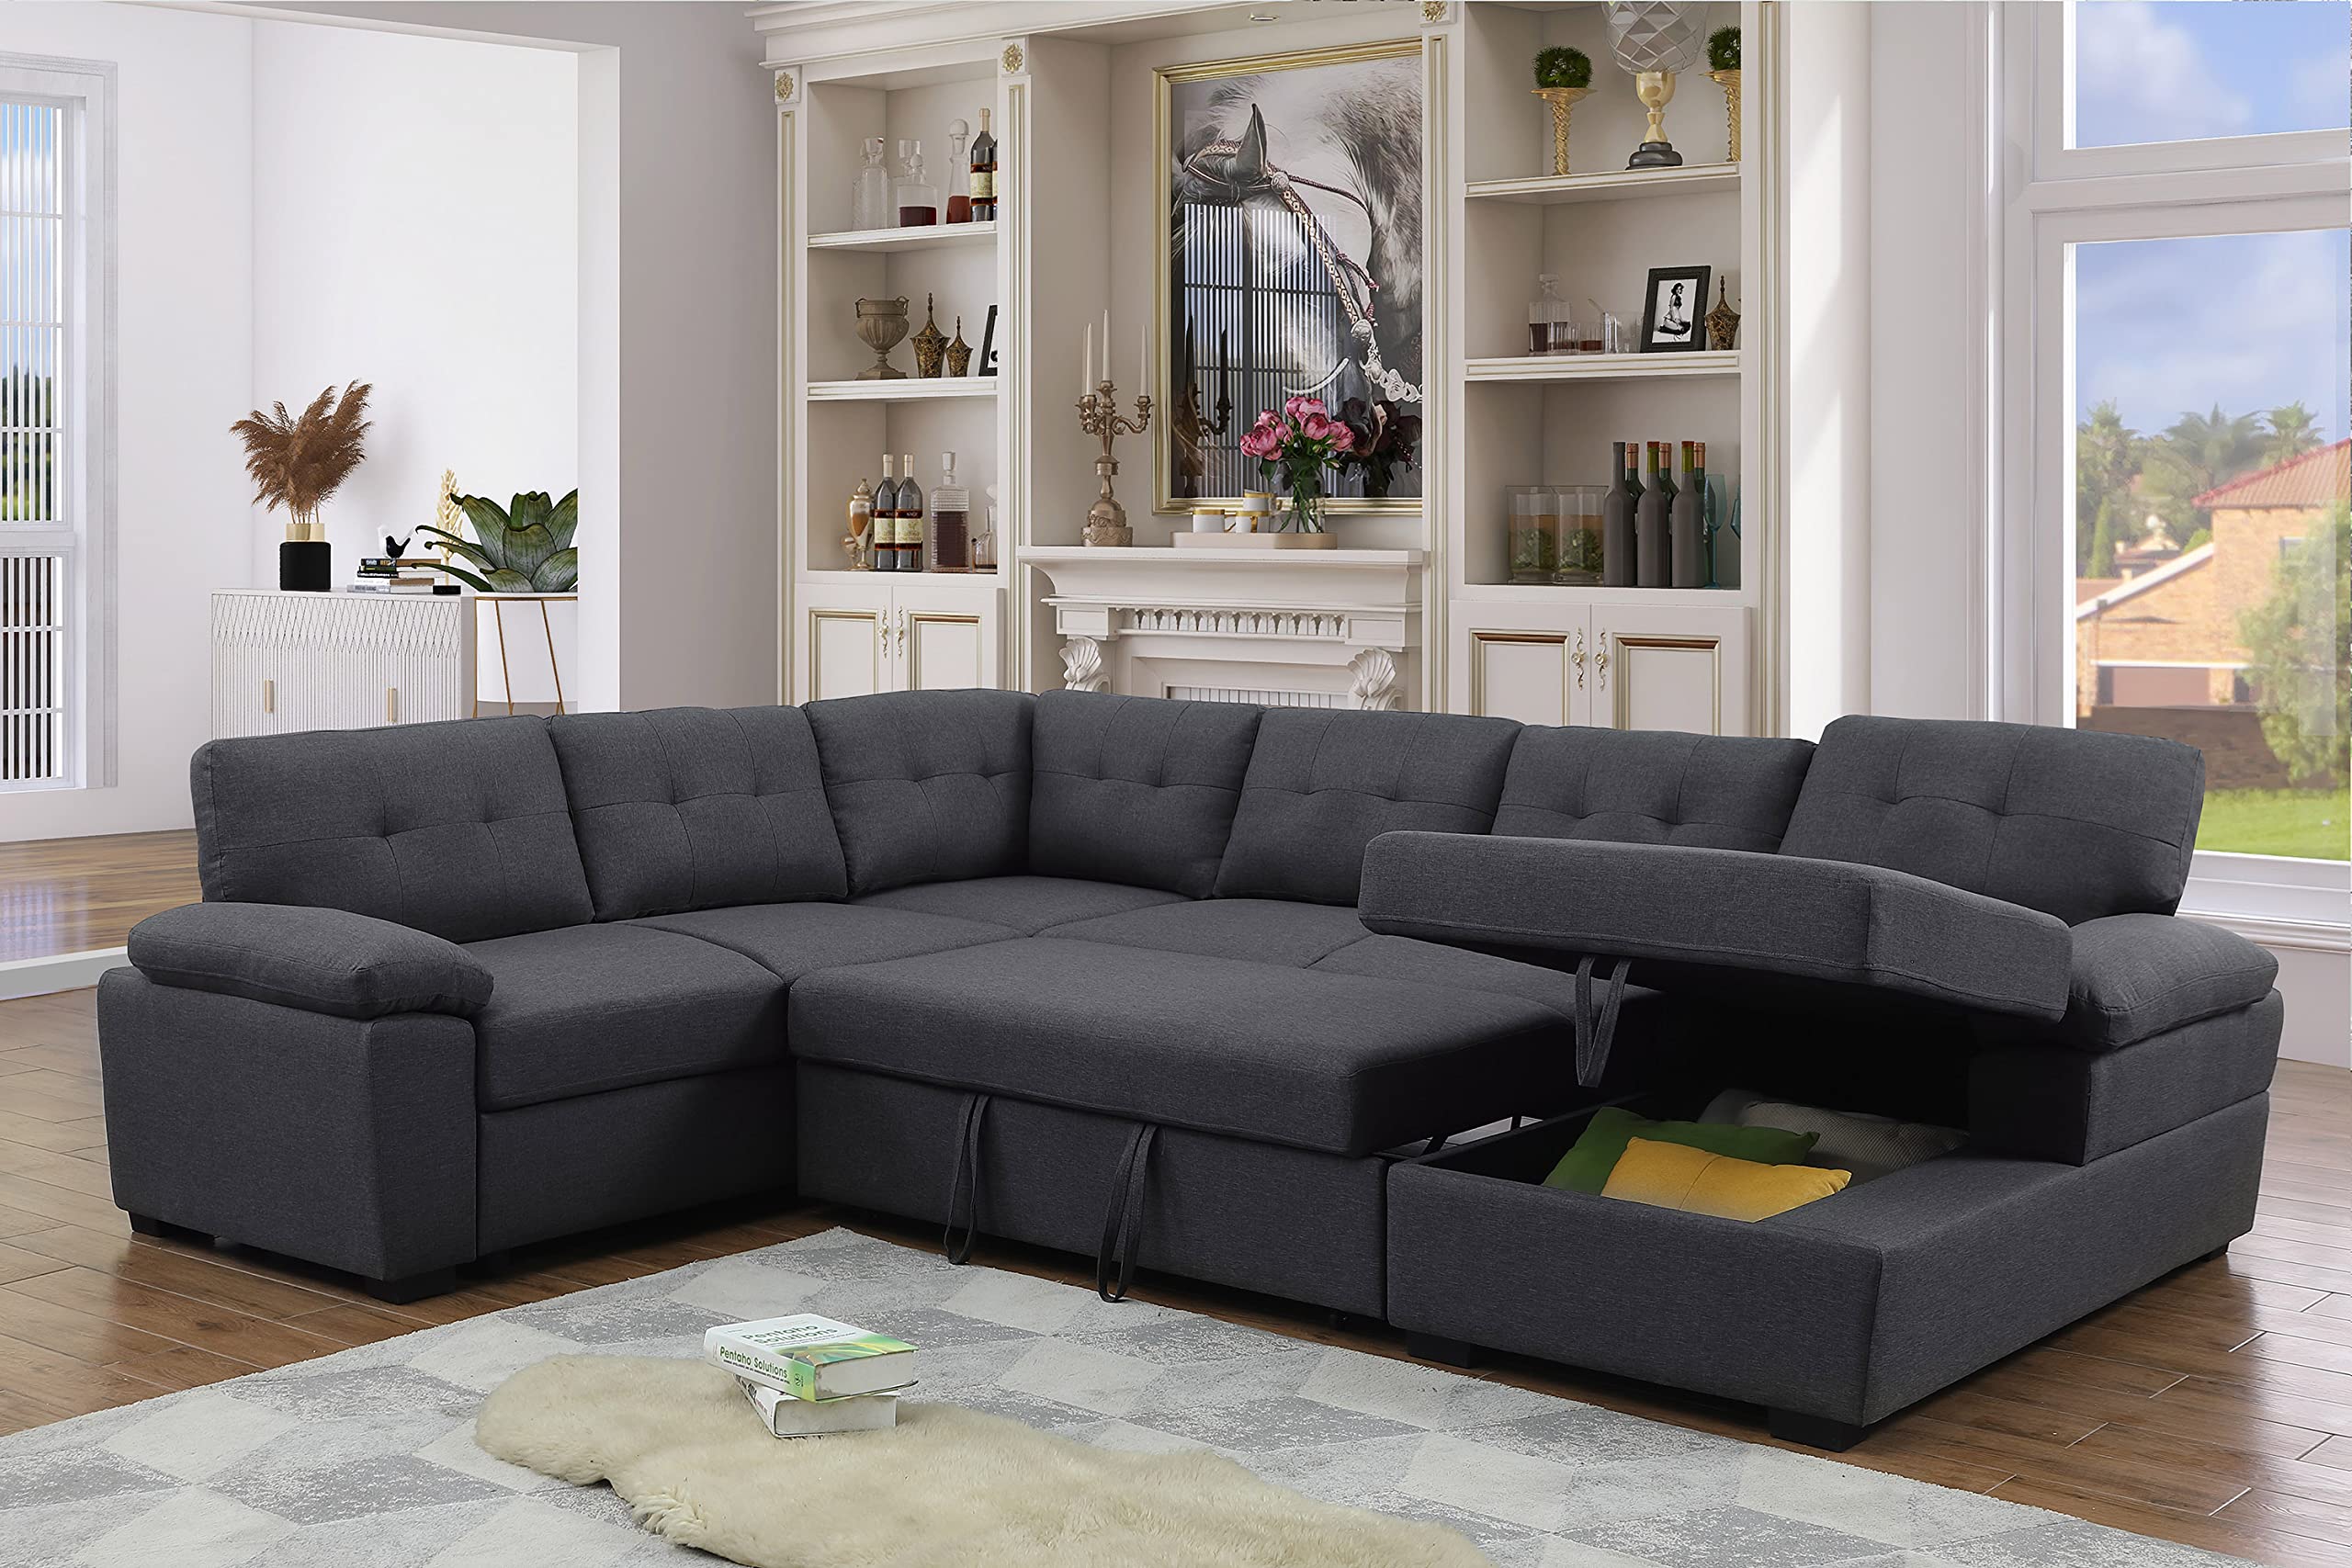 Alexent 5-Seat Modern Fabric Sleeper Sectional Sofa Bed with Pull-Out Bed with Storage Chaise Lounge in Dark Gray Color for Spac